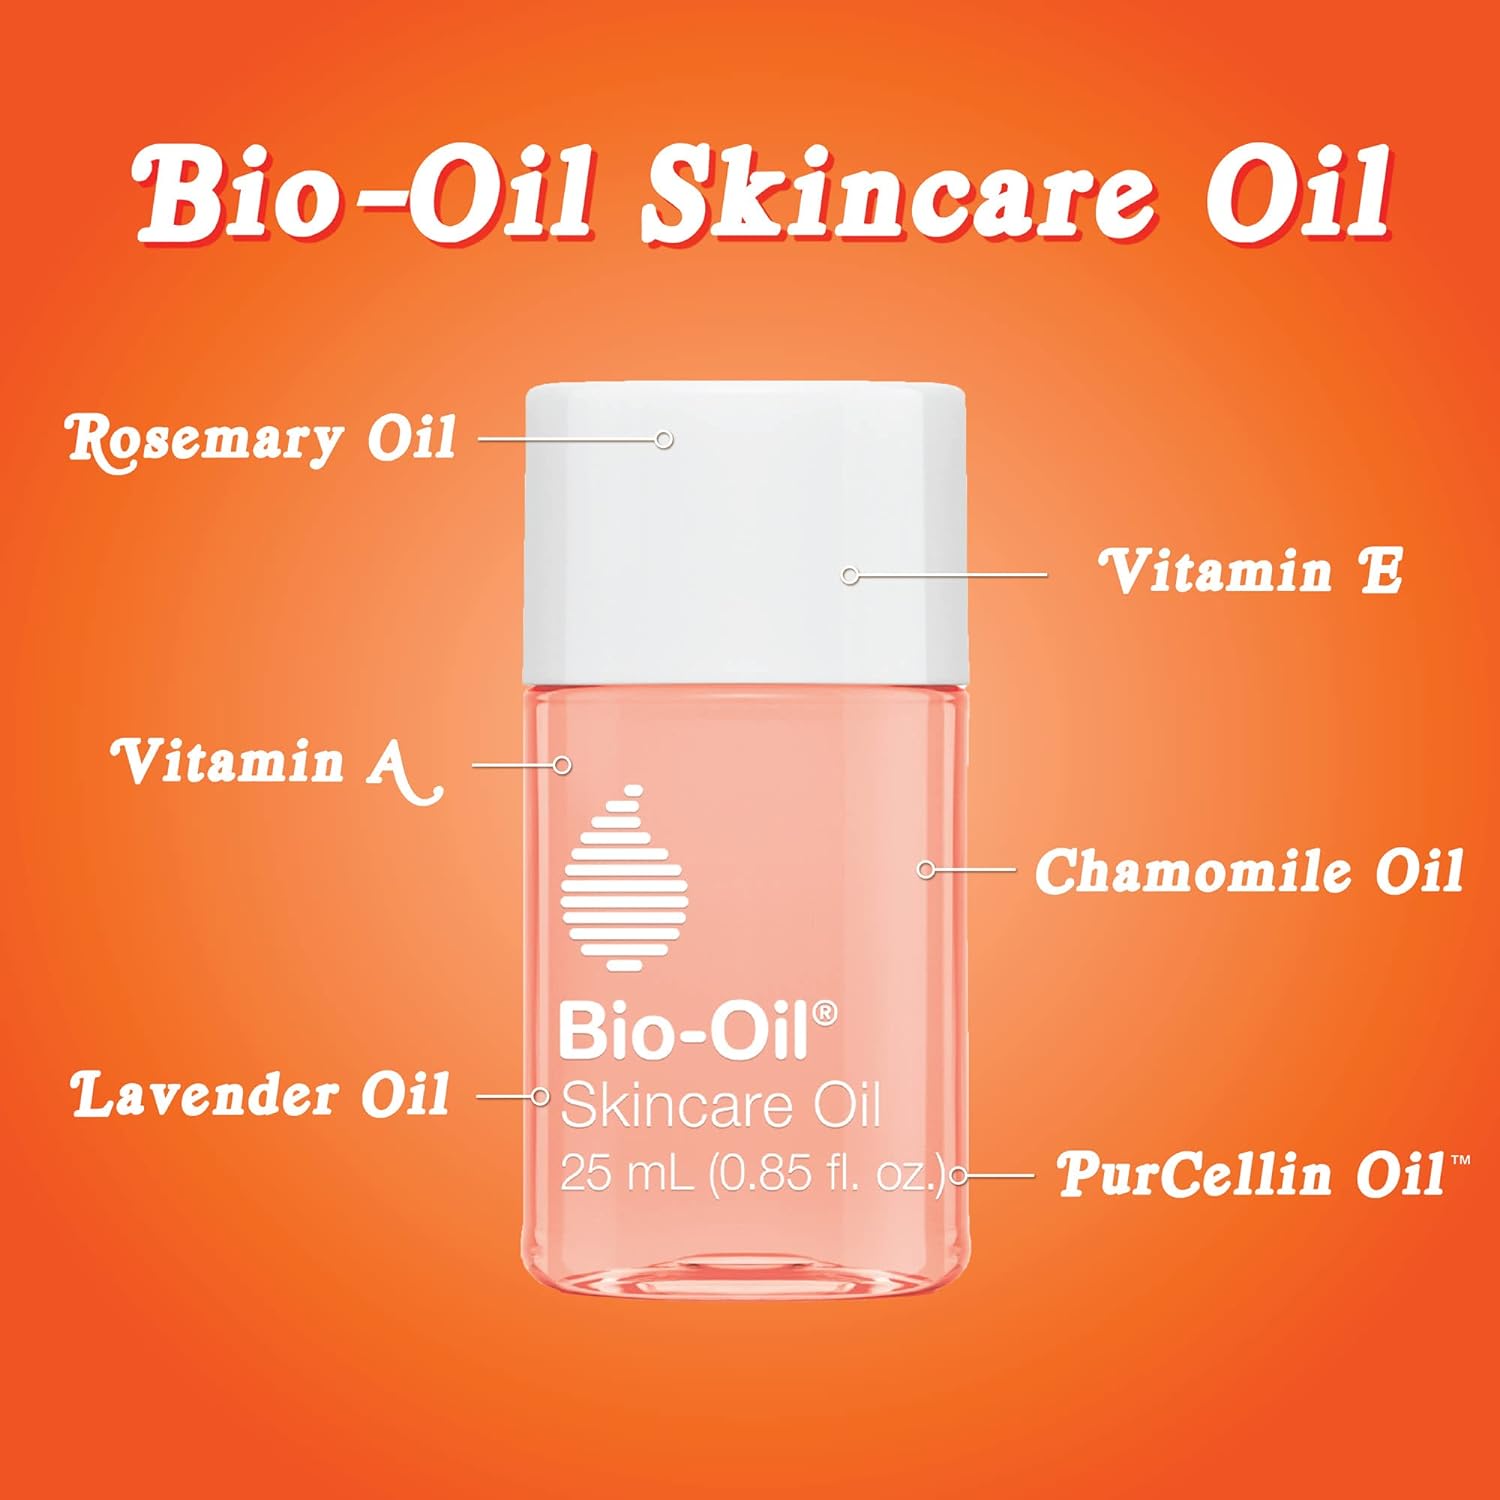 Wholesale prices with free shipping all over United States Bio-Oil Skincare Body Oil, Vitamin E, Serum for Scars & Stretchmarks, Face & Body Moisturizer, 2 oz, All Skin Types - Steven Deals